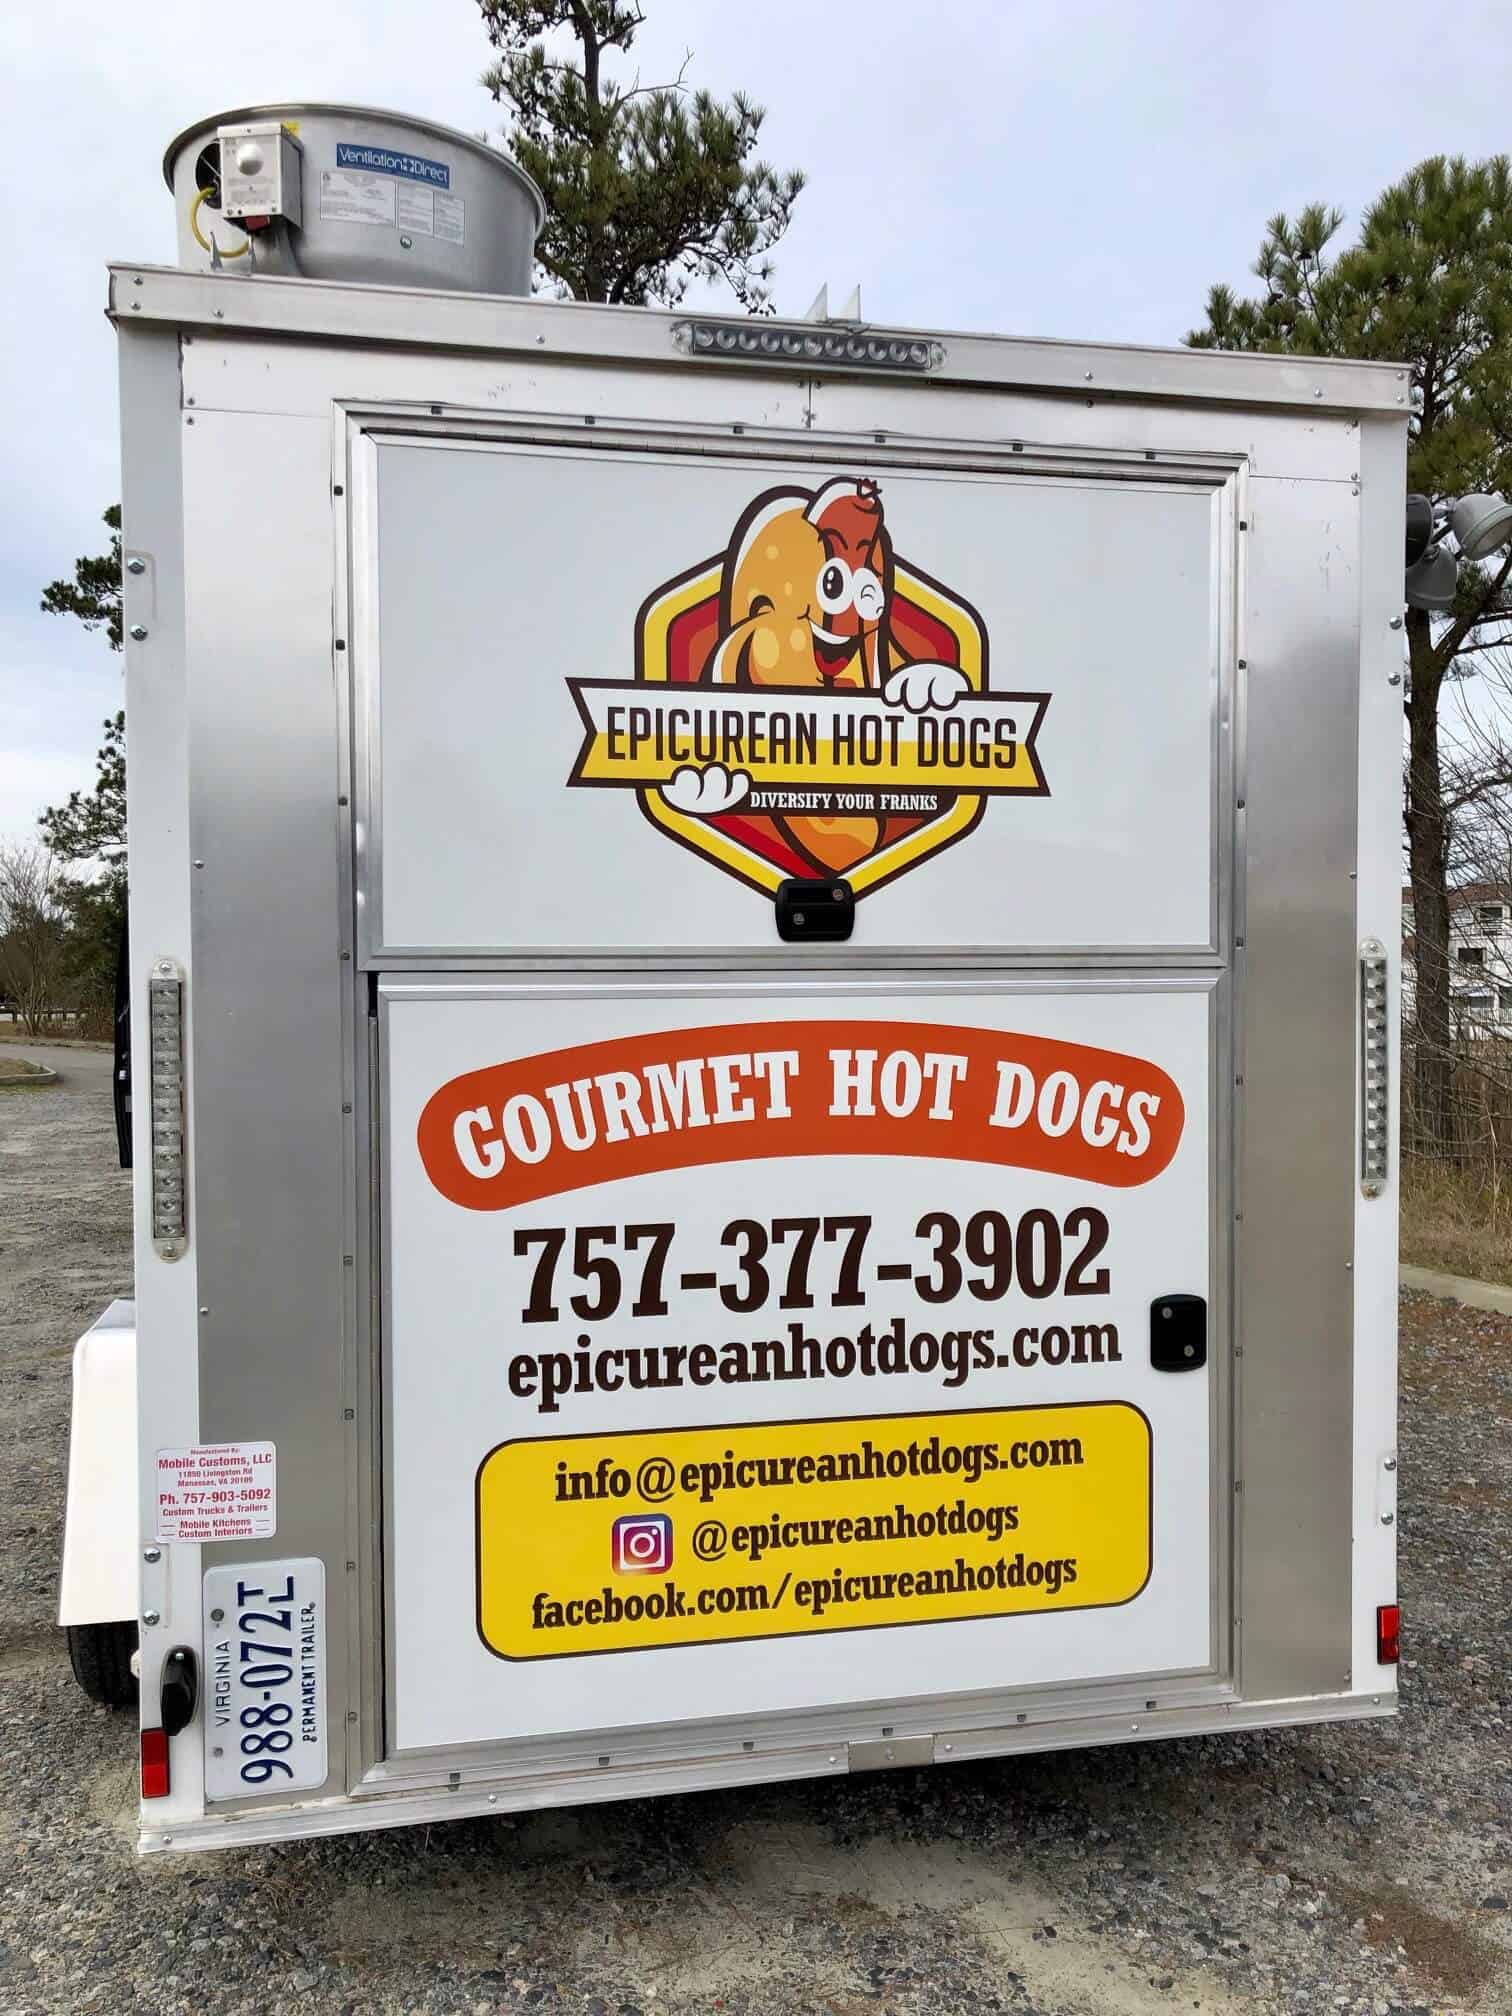 Food vendor truck and trailer wraps - Epicurean-Hot-Dogs food truck wrap (rear view)